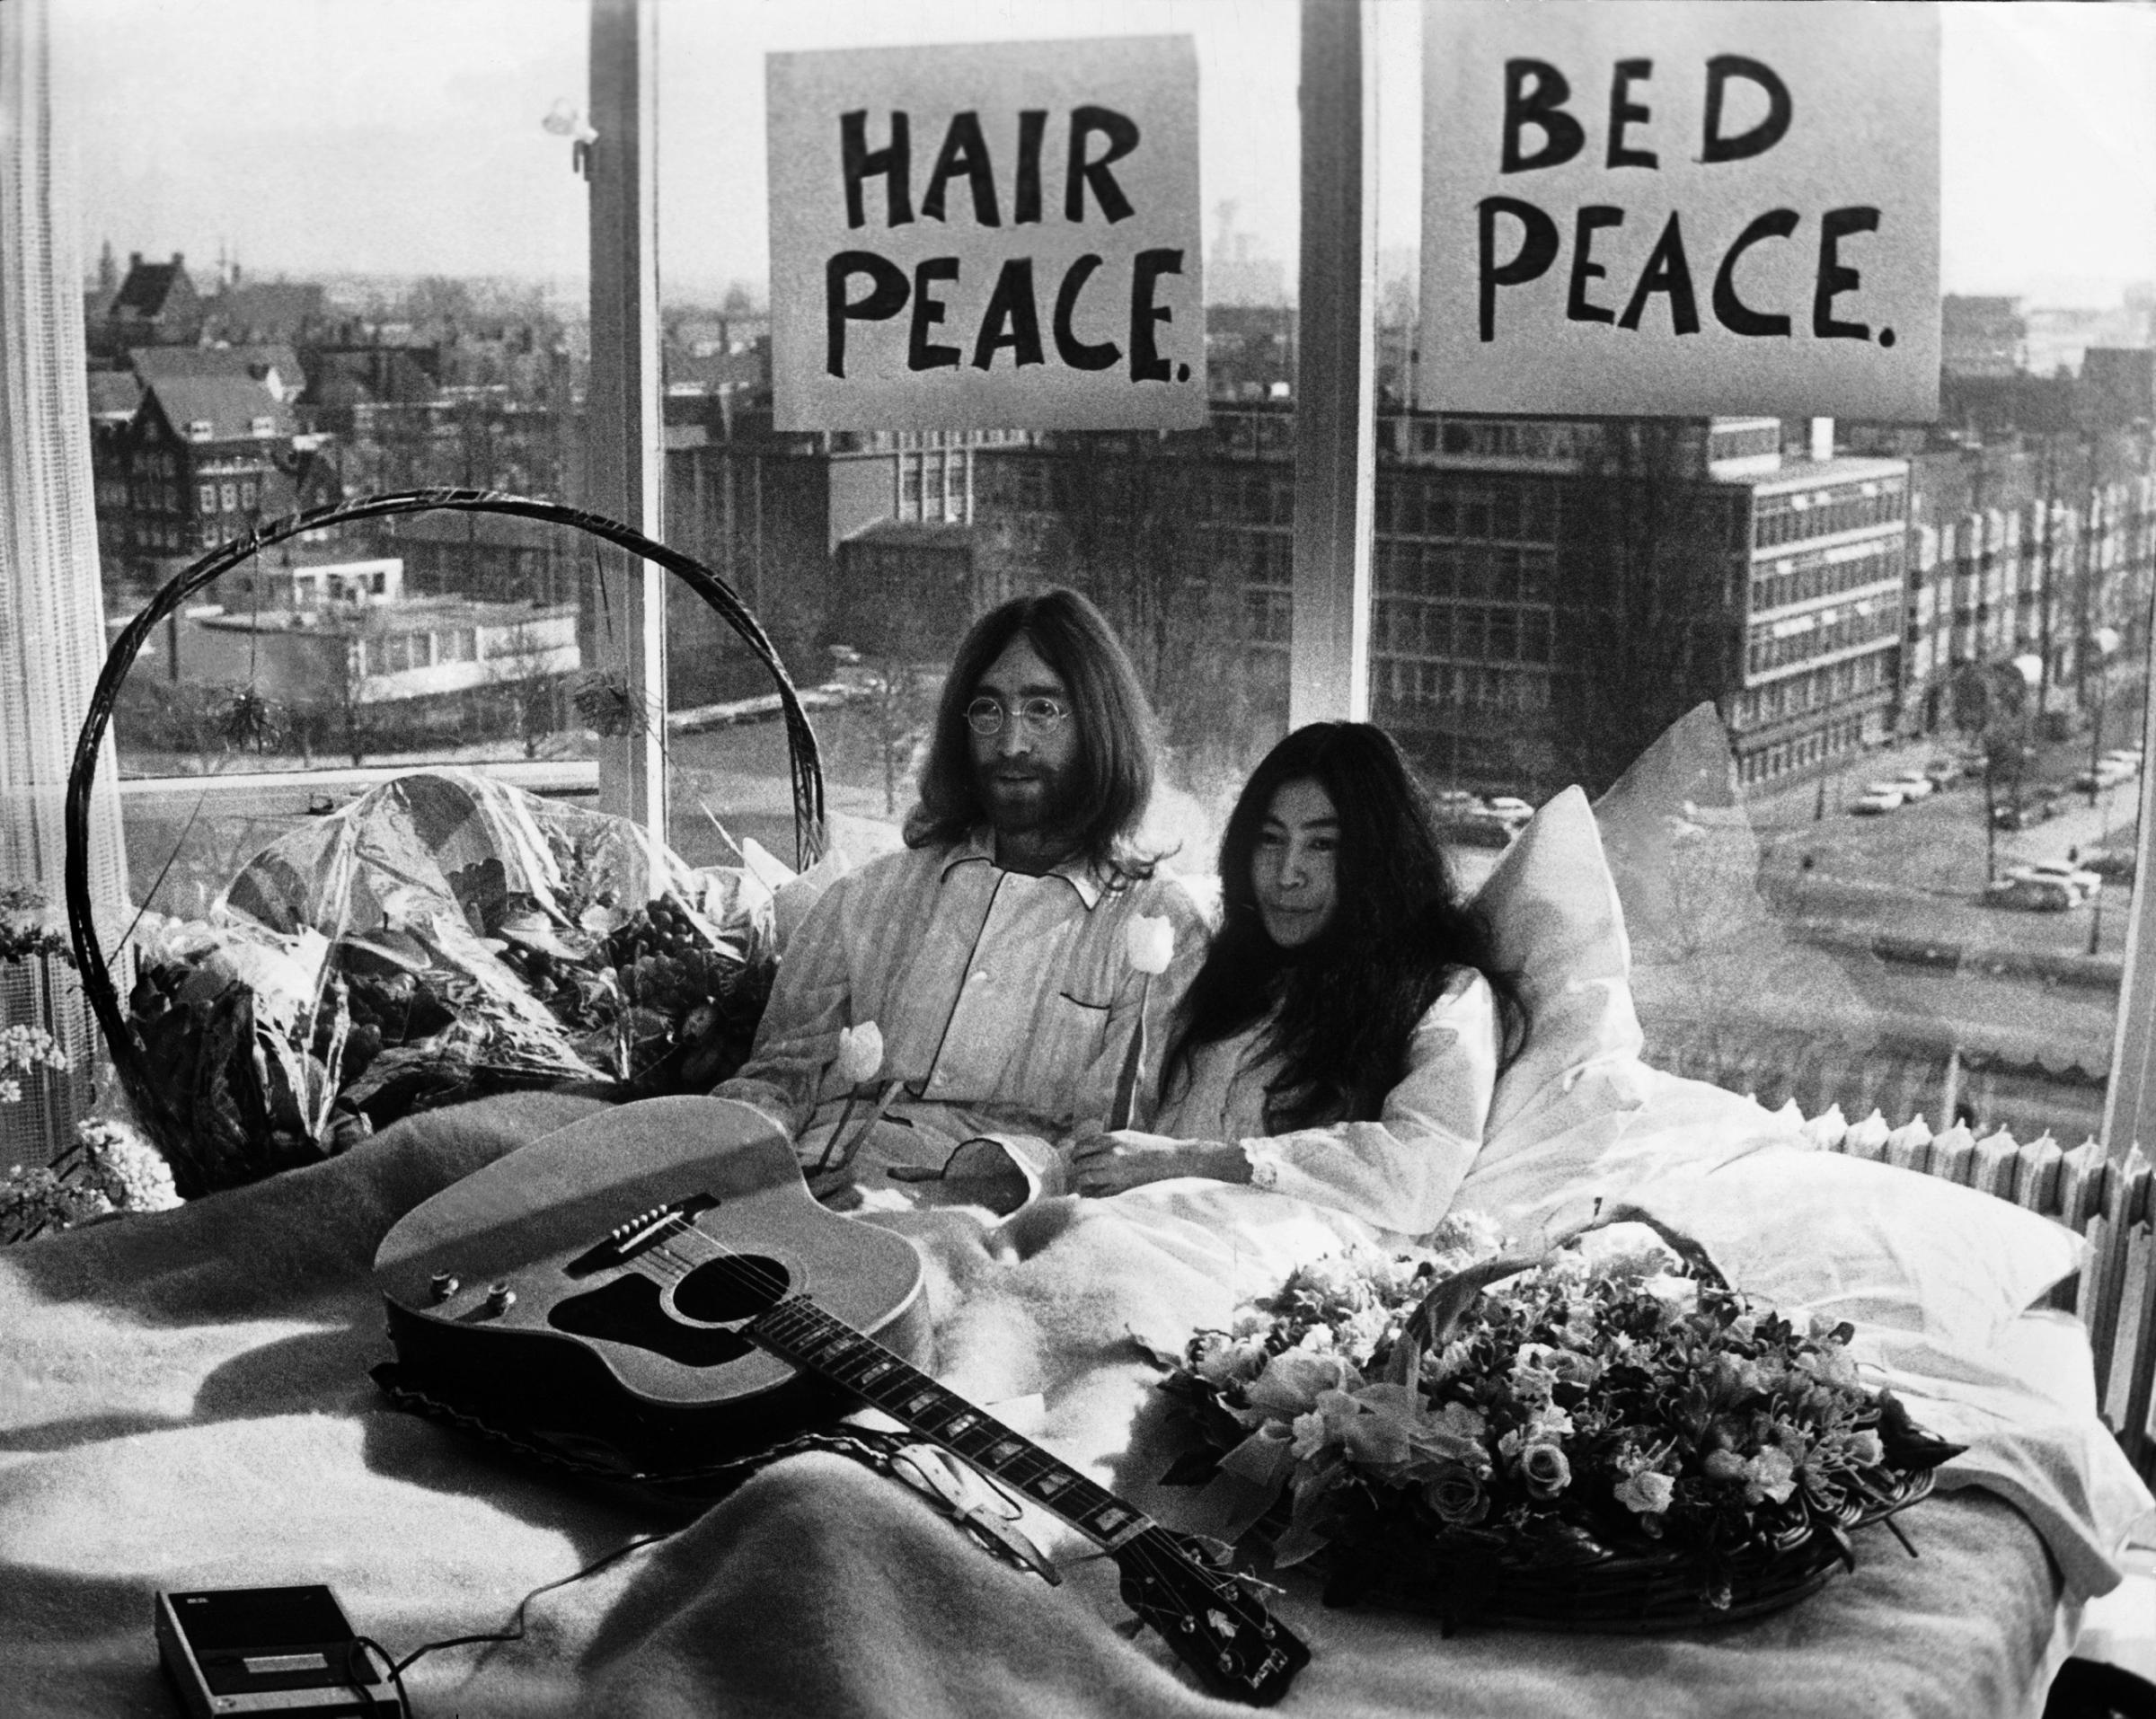 John Lennon and his wife Yoko Ono holding a press conference in their bed at Amsterdam Hilton Hotel, during their honeymoon. March 26, 1969.